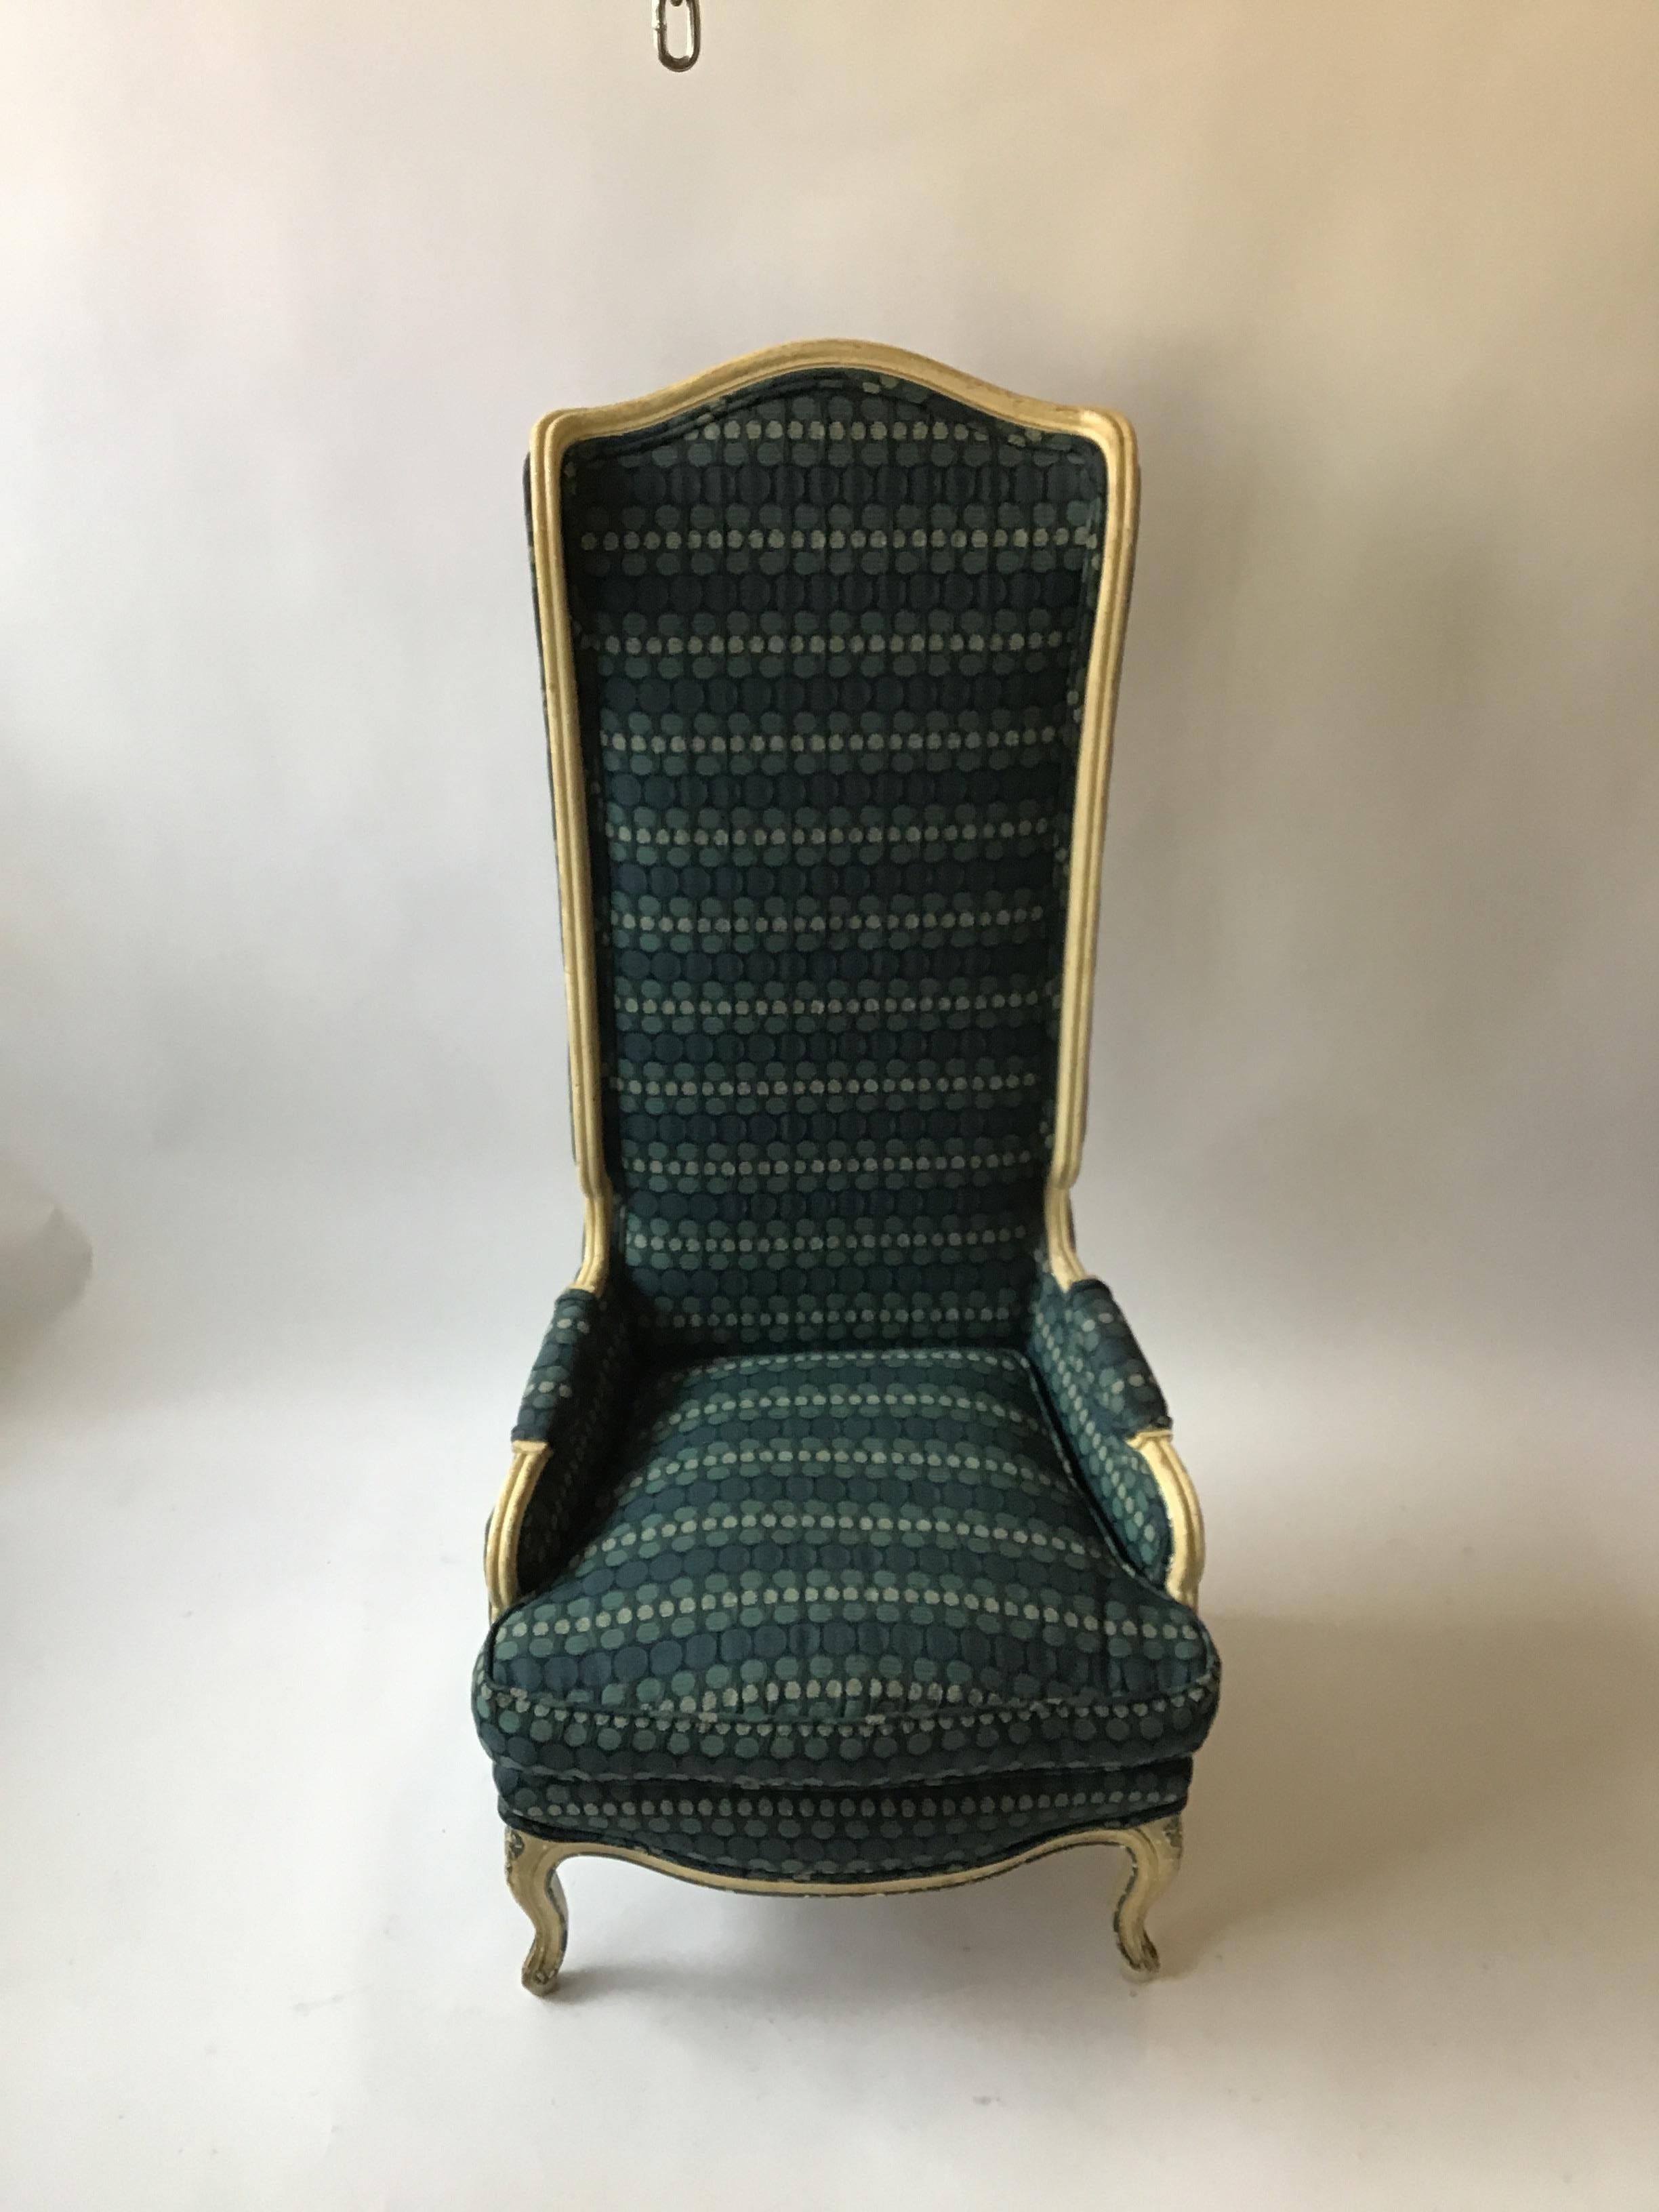 1950s French style high back wing chair. Needs reupholstering.